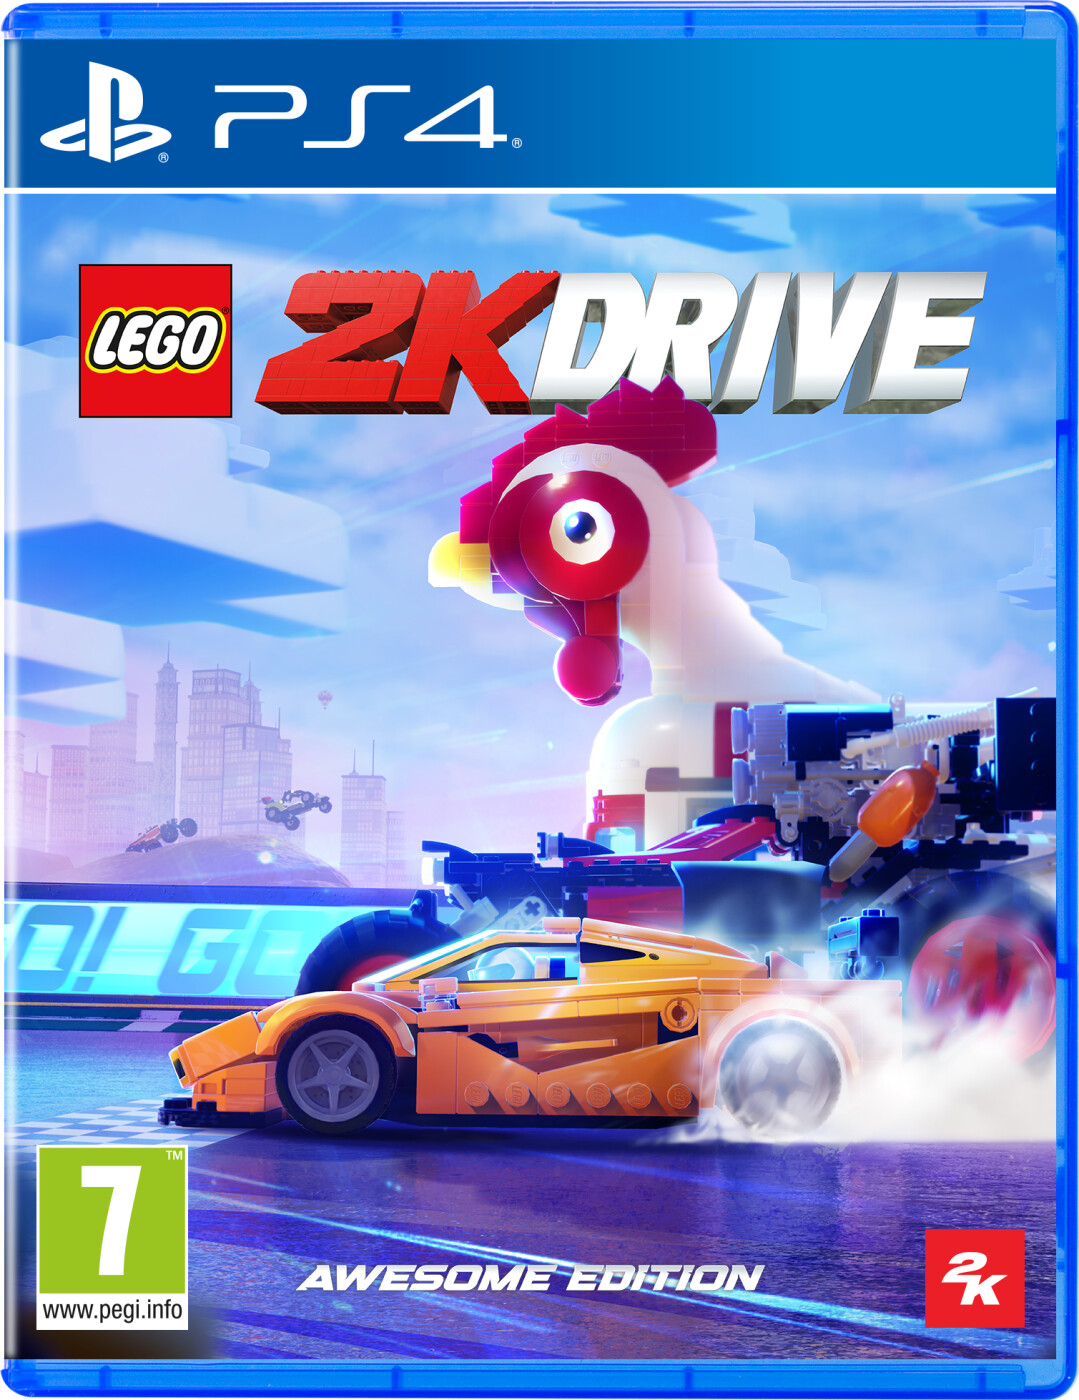 Lego 2k Drive (awesome Edition) - PS4